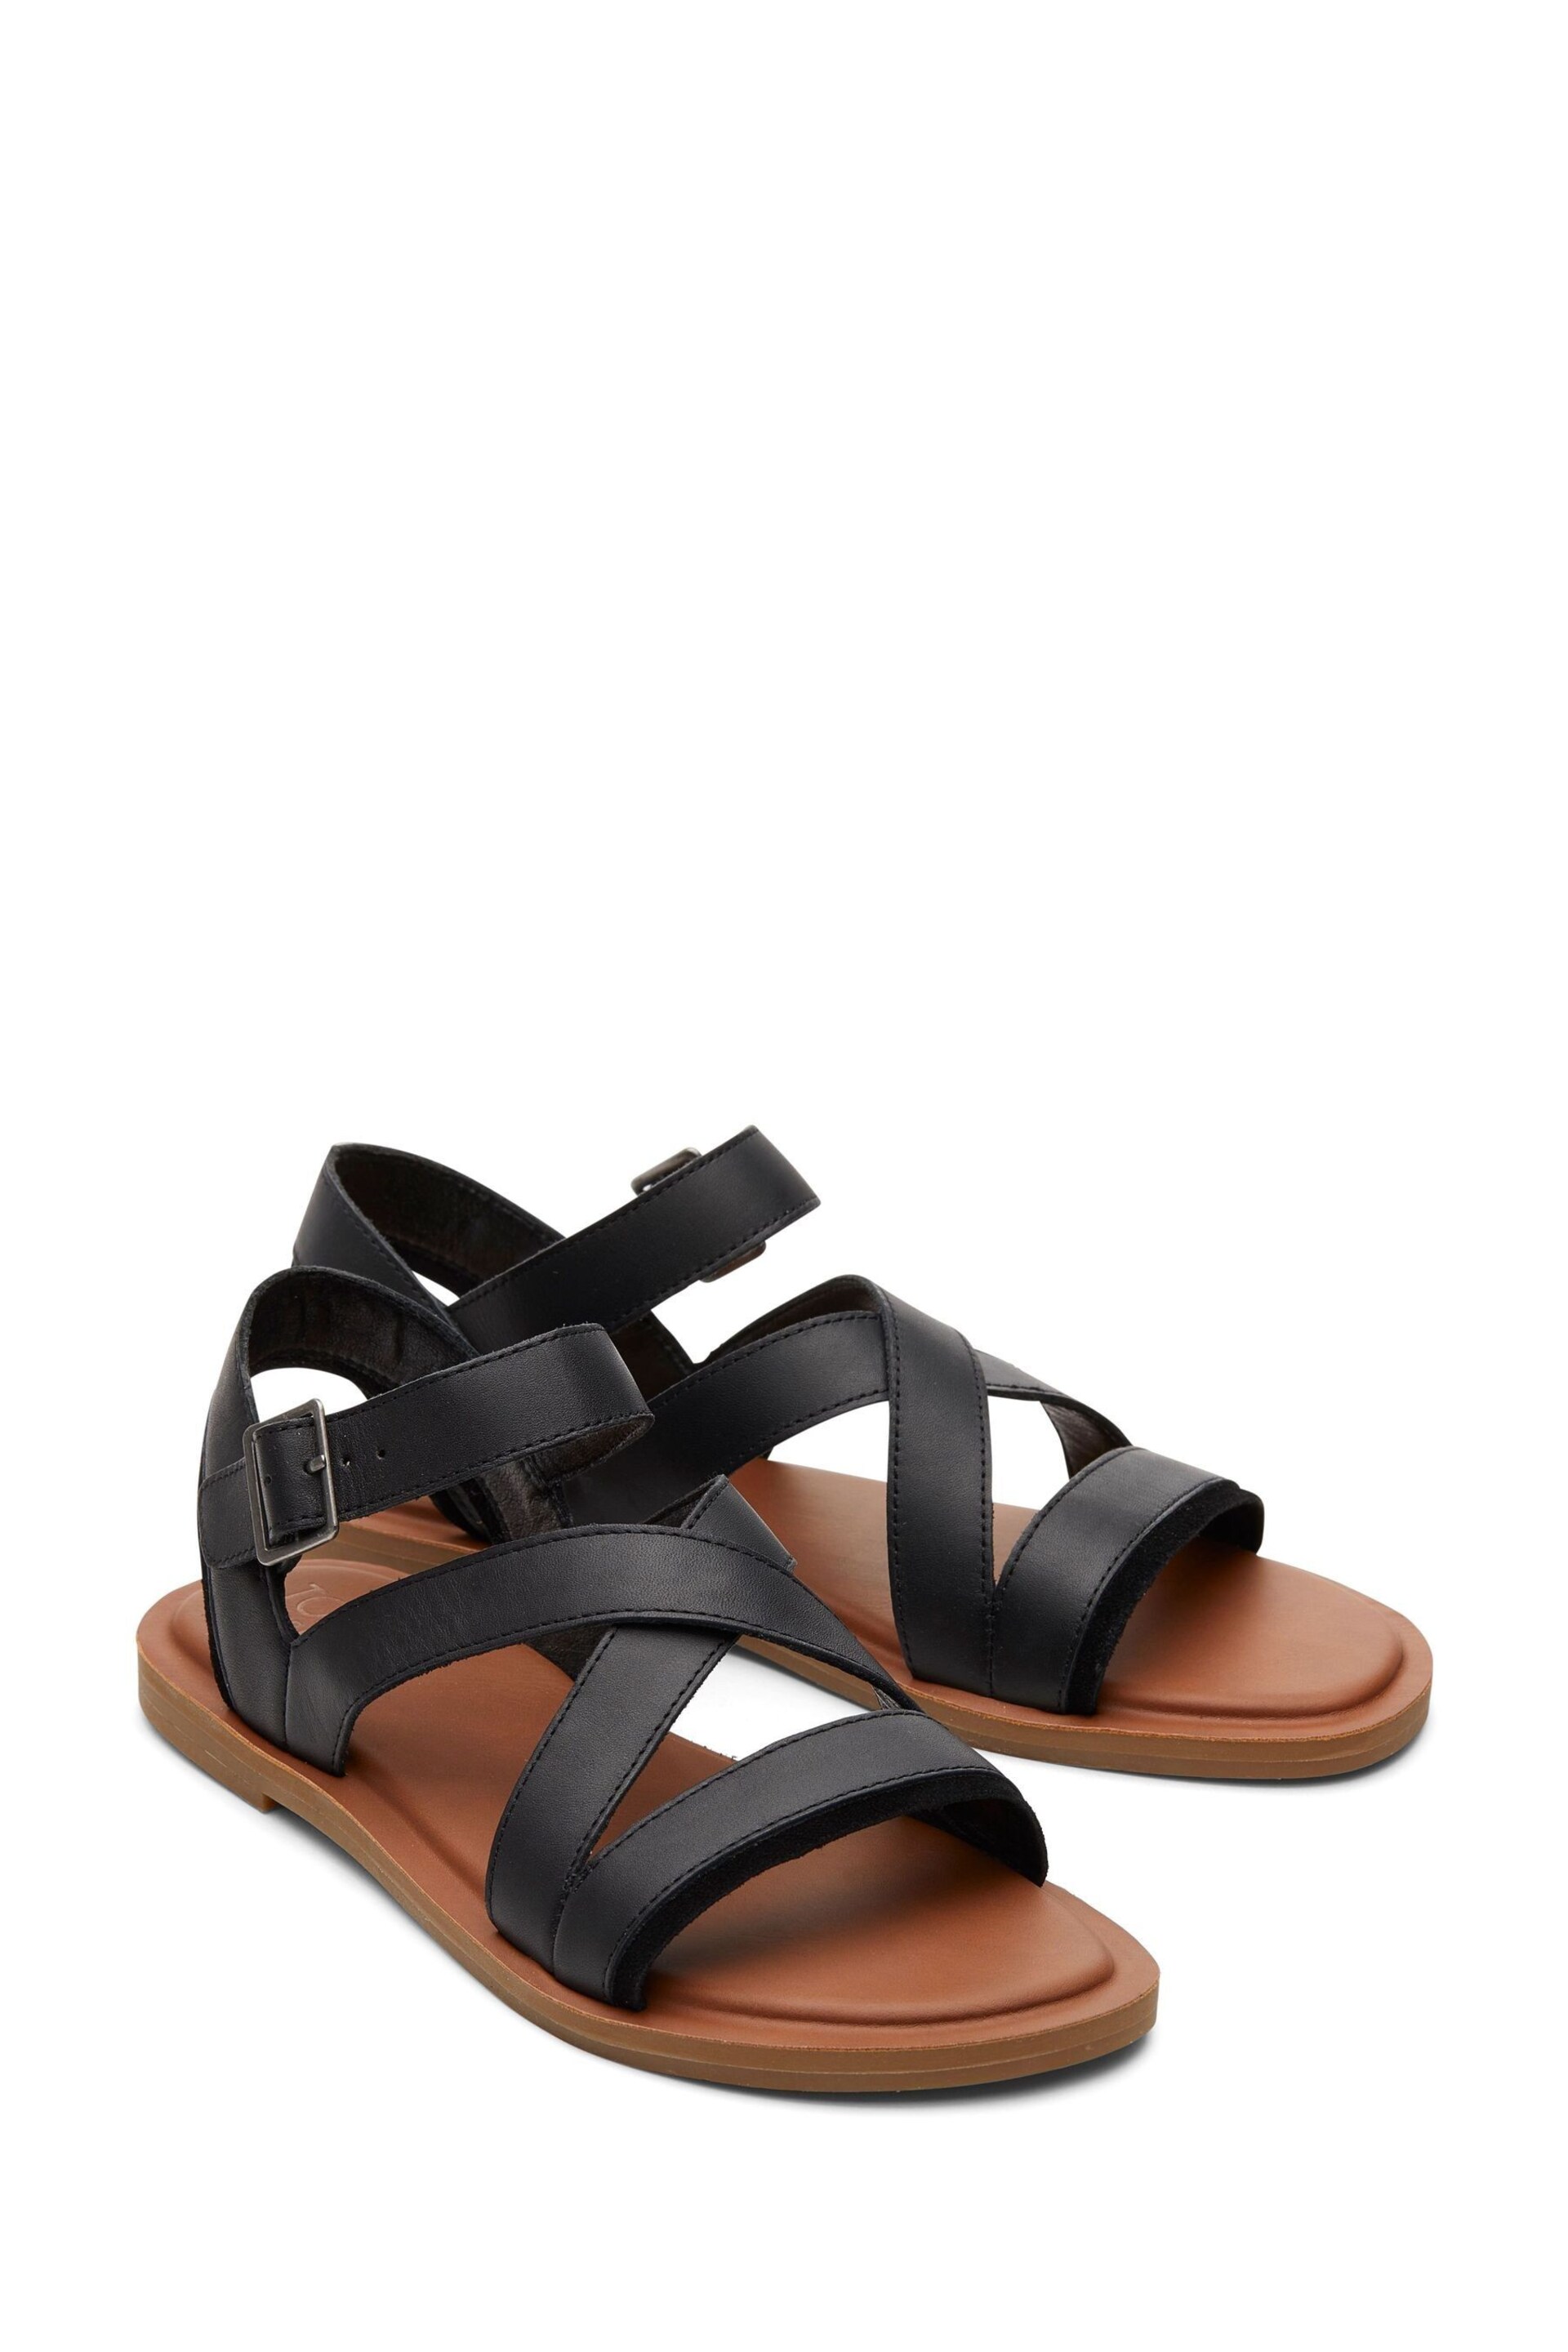 TOMS Sloane Black Sandals In Leather - Image 3 of 6